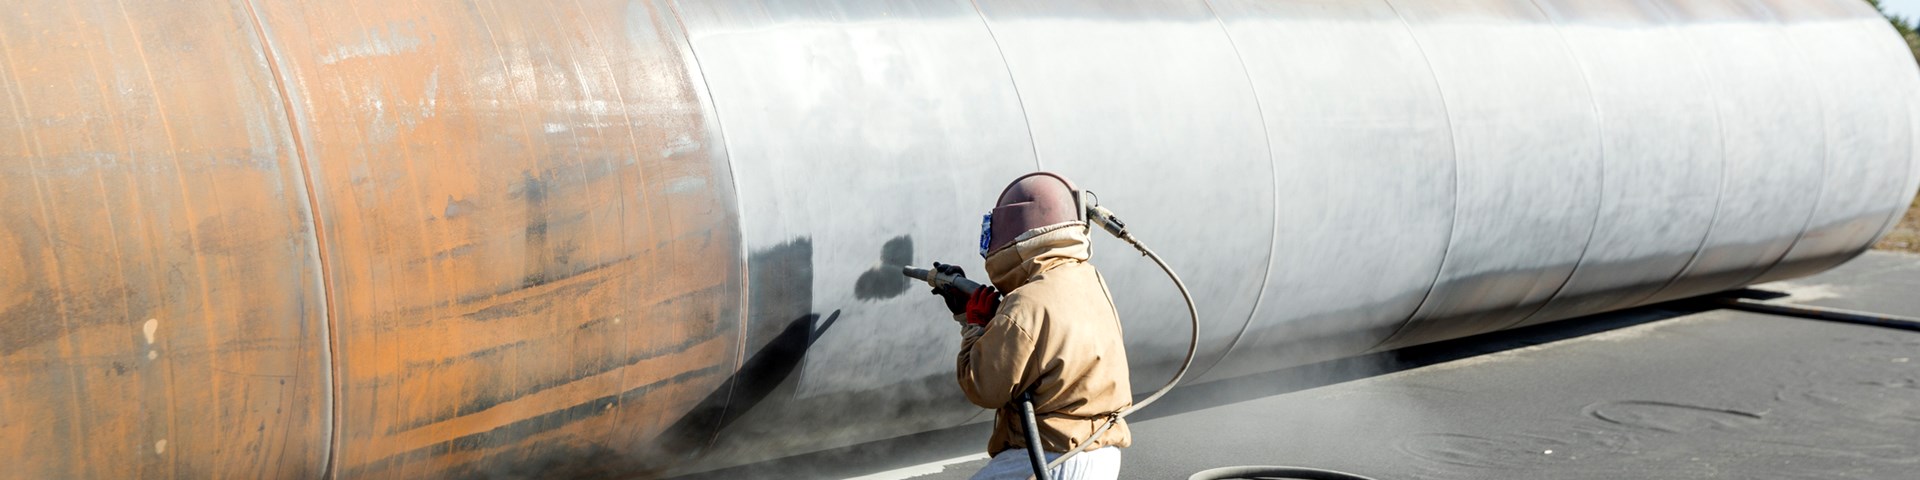 Worker manually sandblasting a large pipe